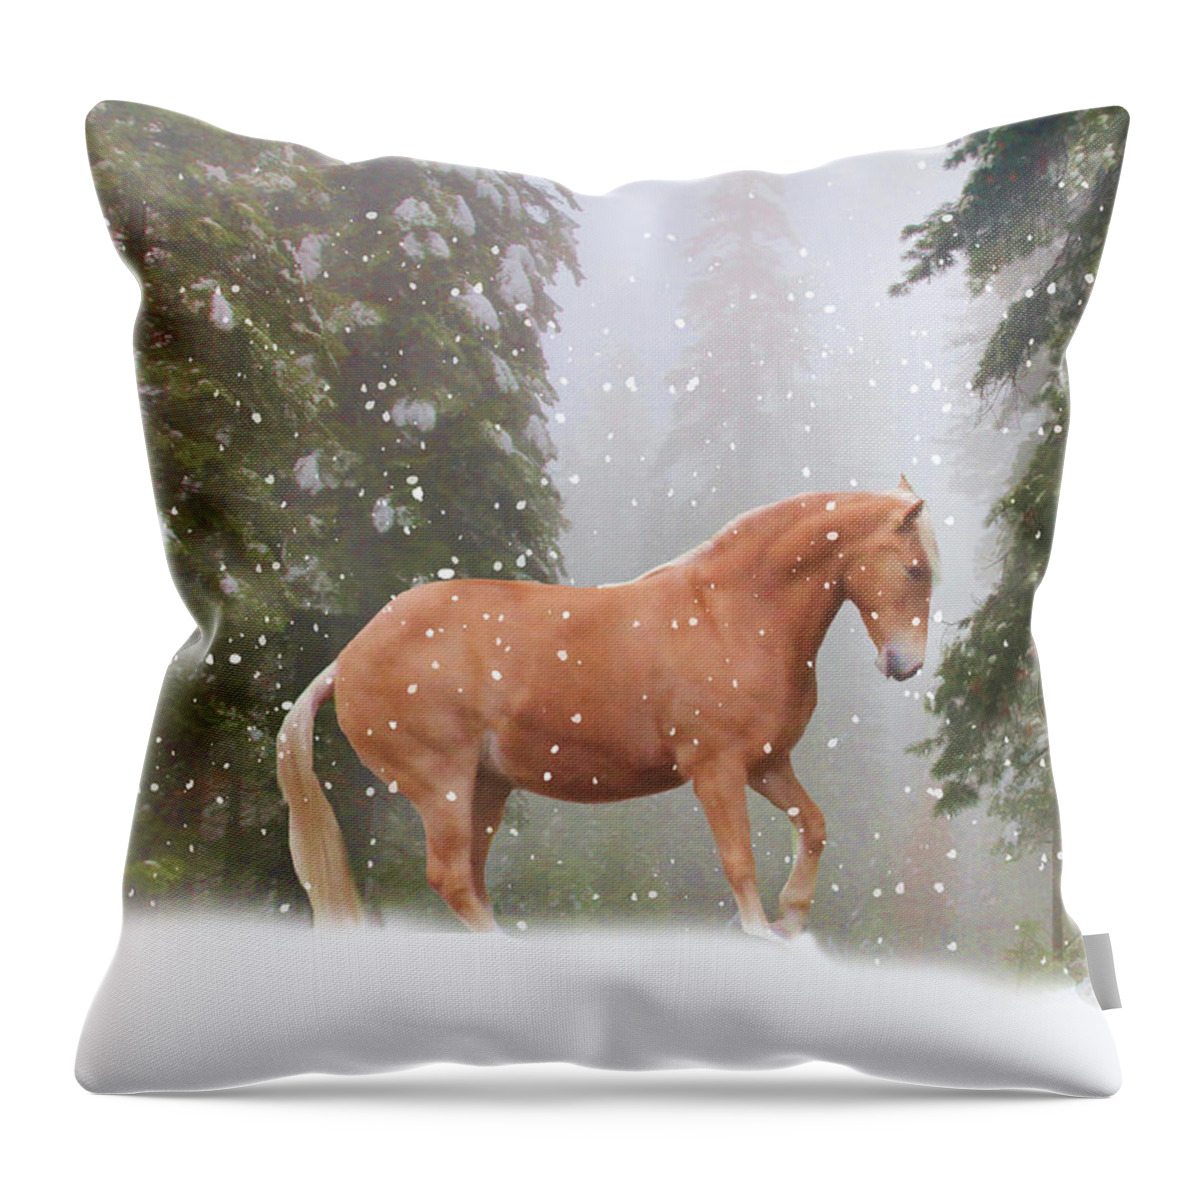 Snow Throw Pillow featuring the photograph Xmas Horse by Stephanie Laird